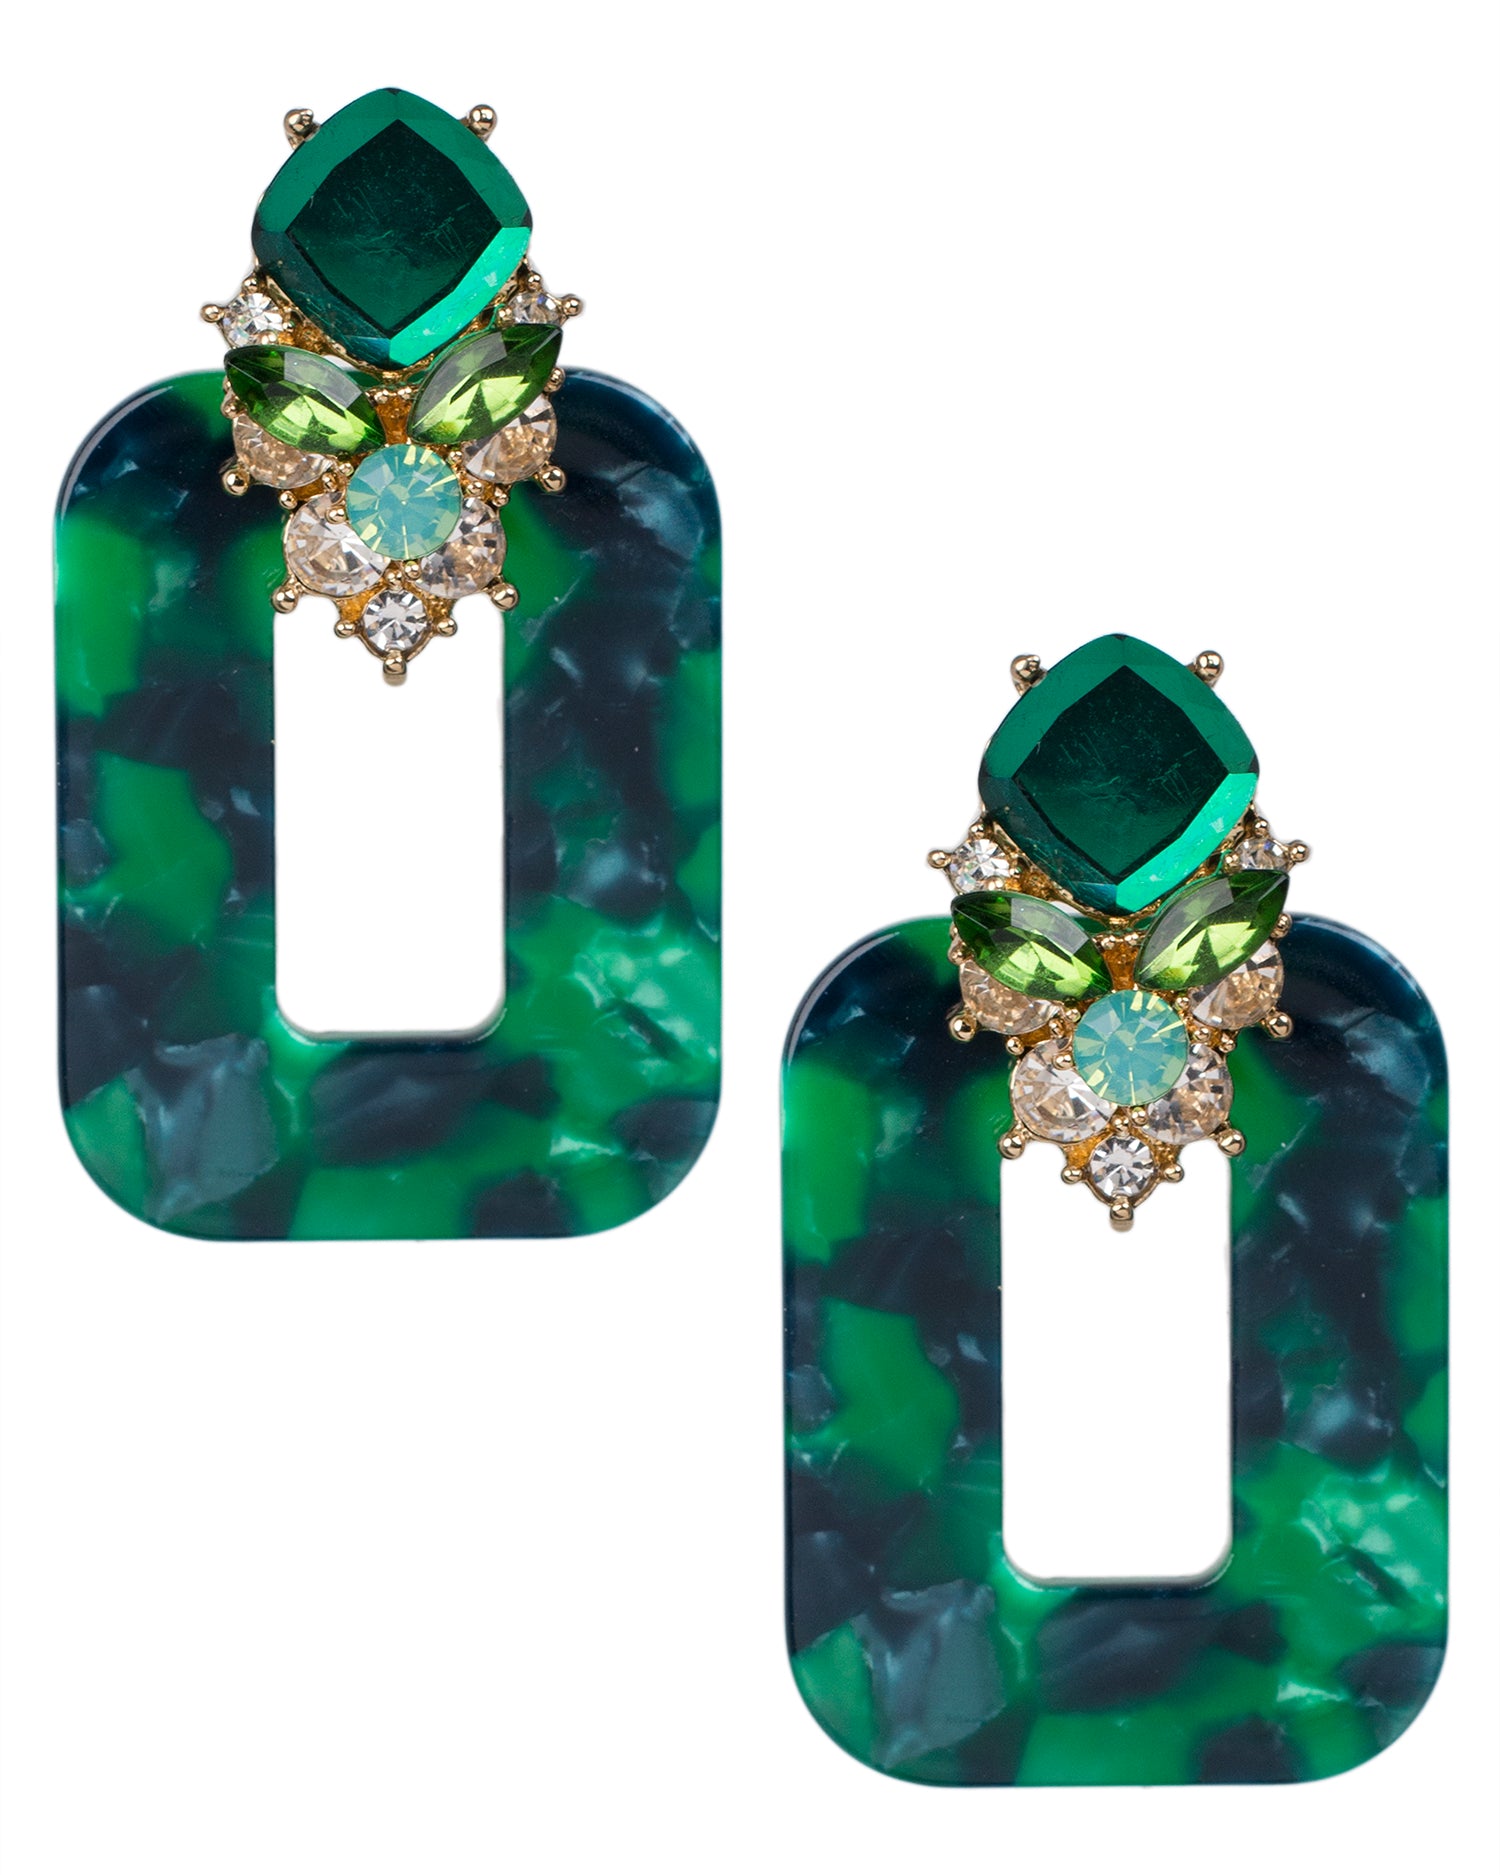 Green Marble Resin and Crystal Earrings